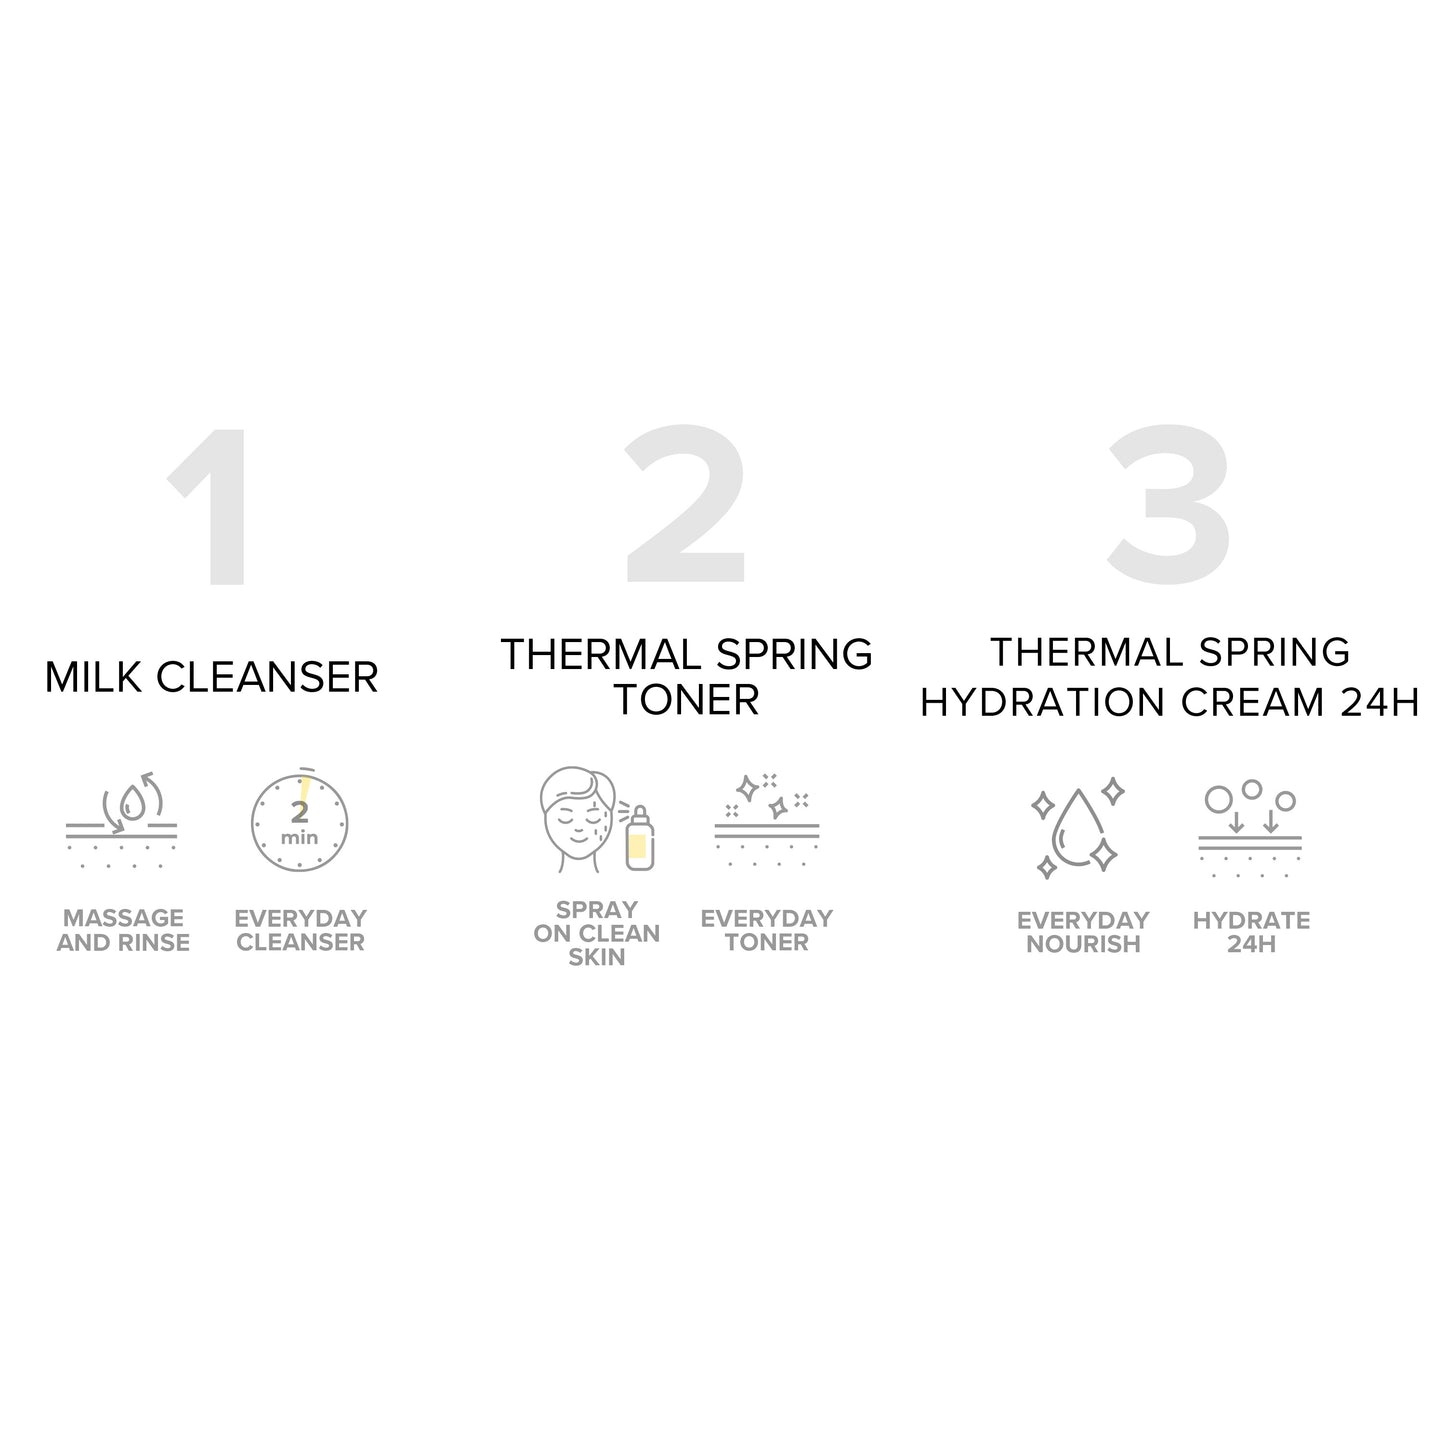 EVERYDAY CLEANSING & HYDRATION